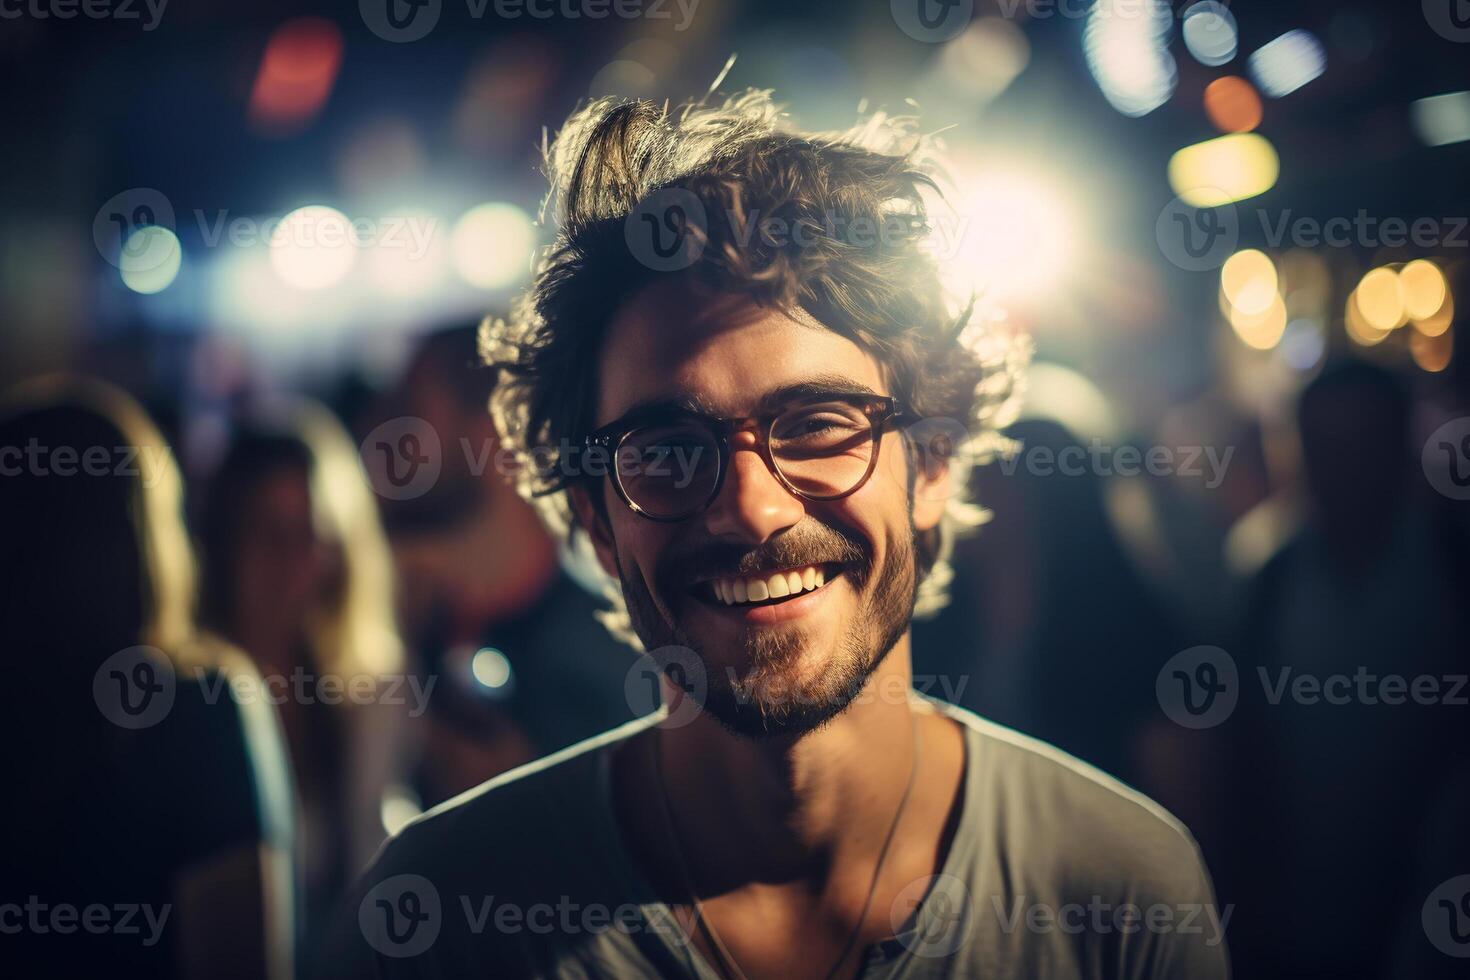 AI generated Cheerful man at concert, smiling handsome guy with glasses at music festival at night looking at camera photo